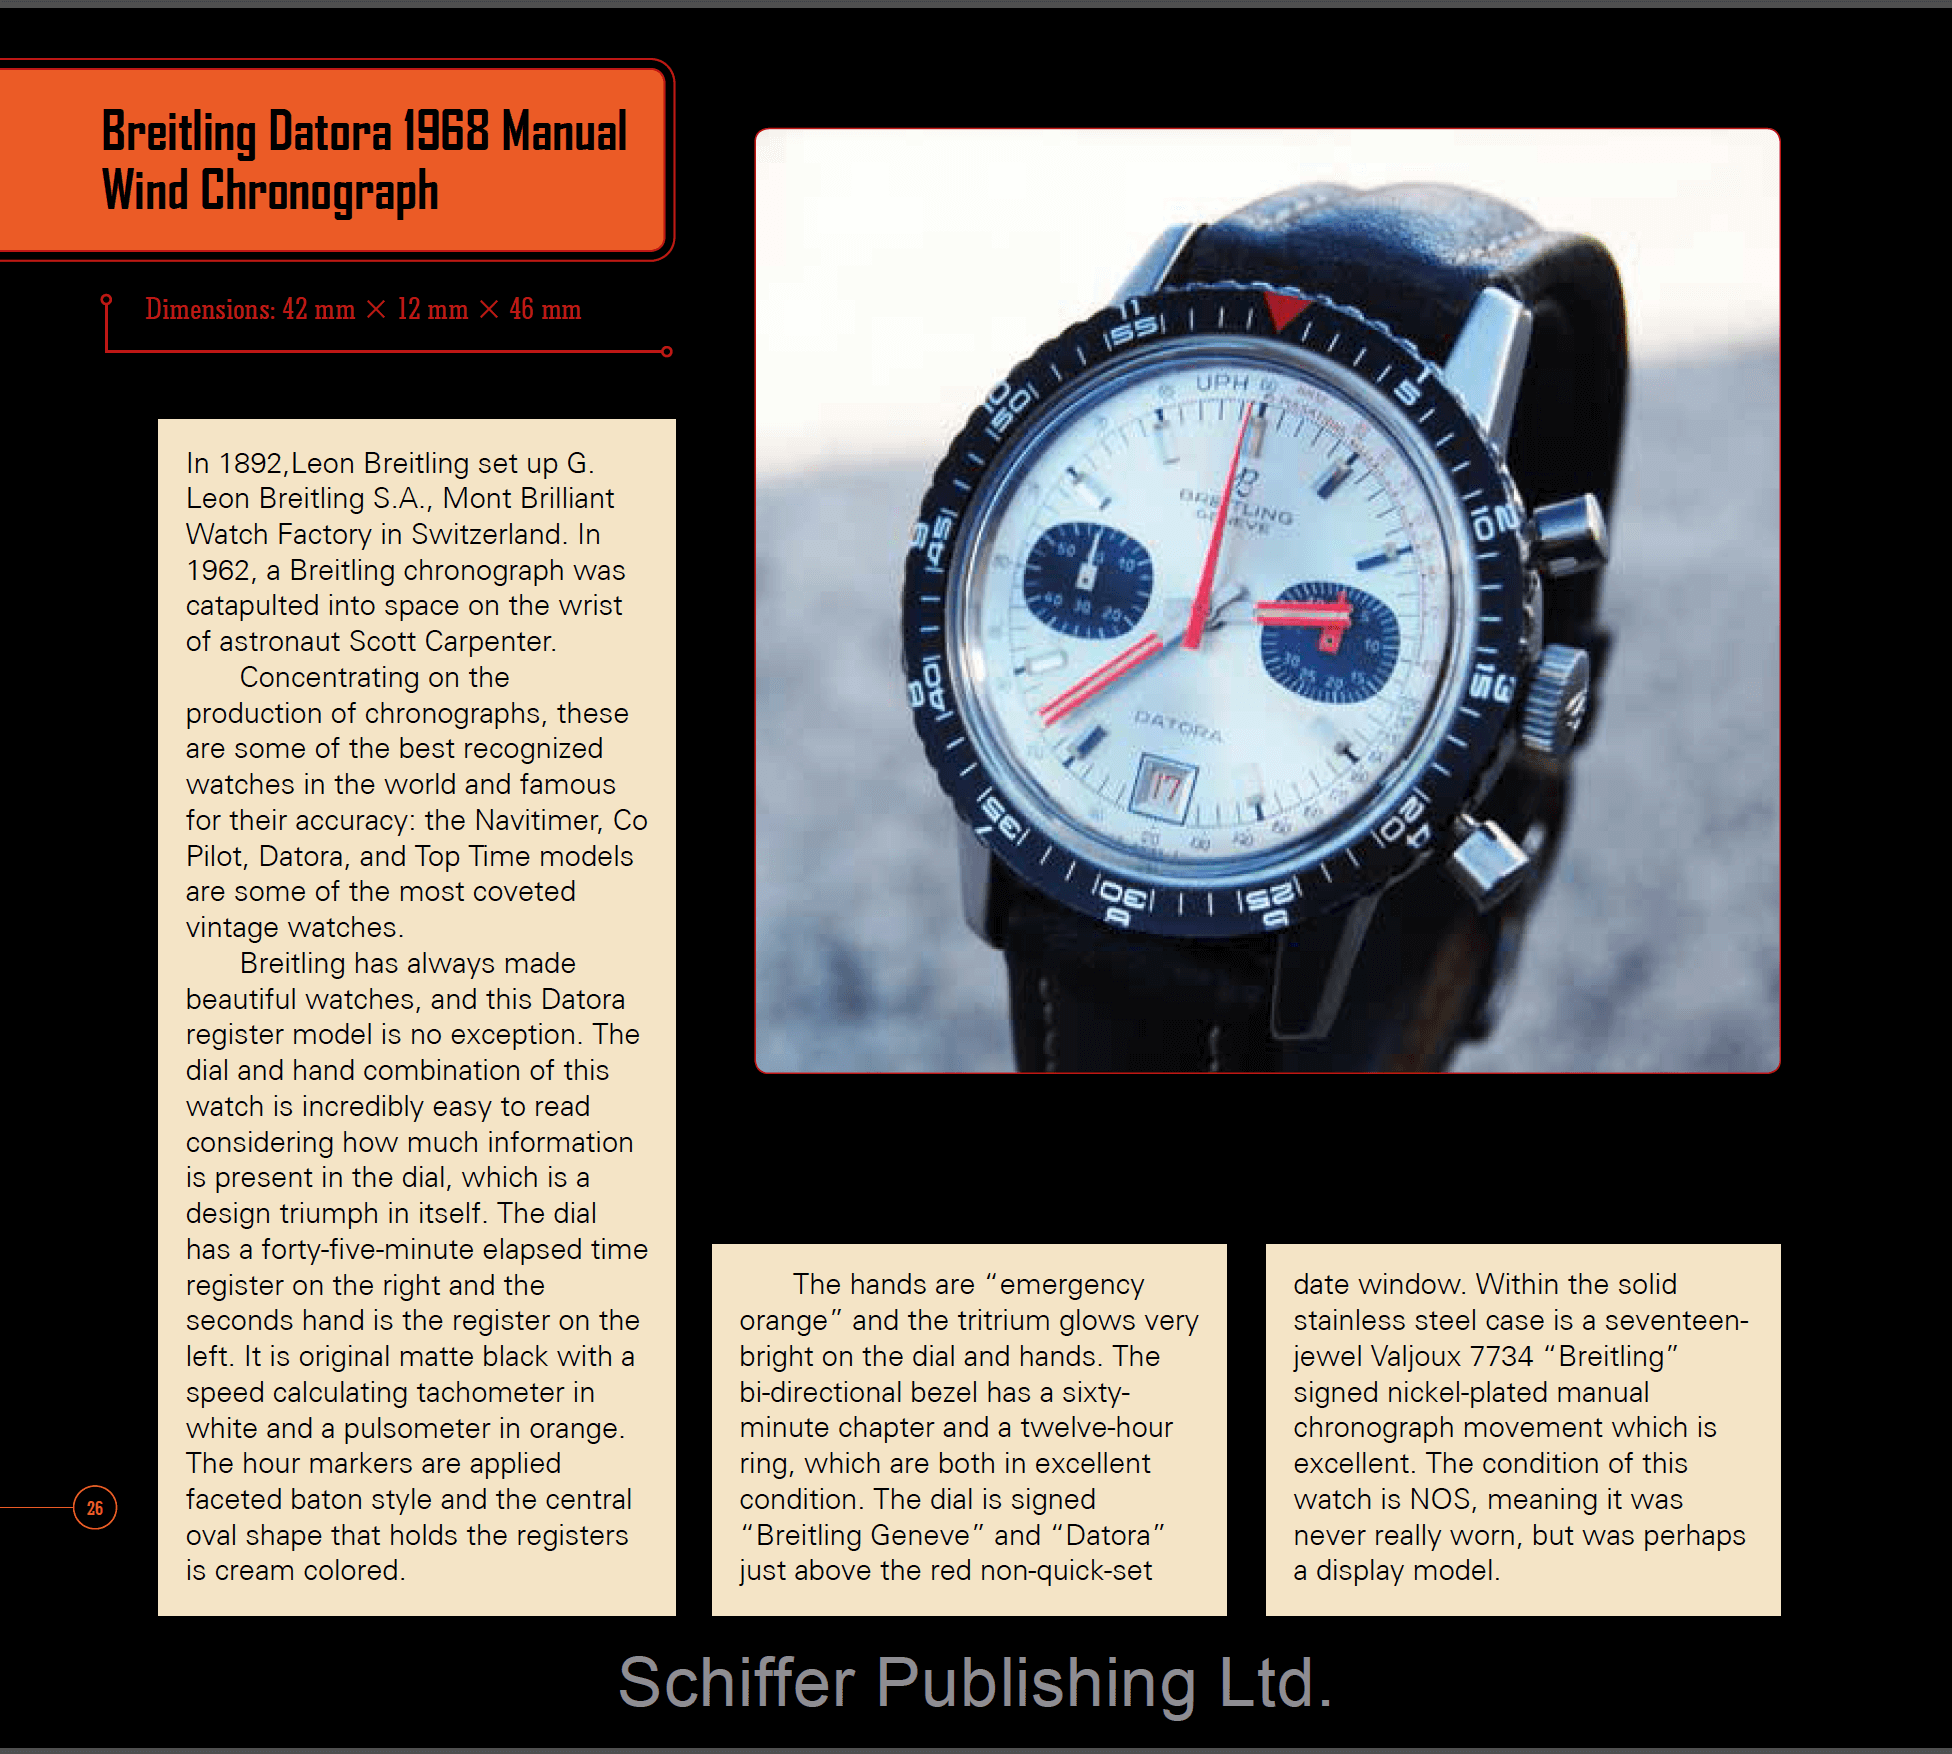 Breitling Datora 1968 Manual Wind Chronograph page 26 of 'Chasing Time' by Alistair Gibbons